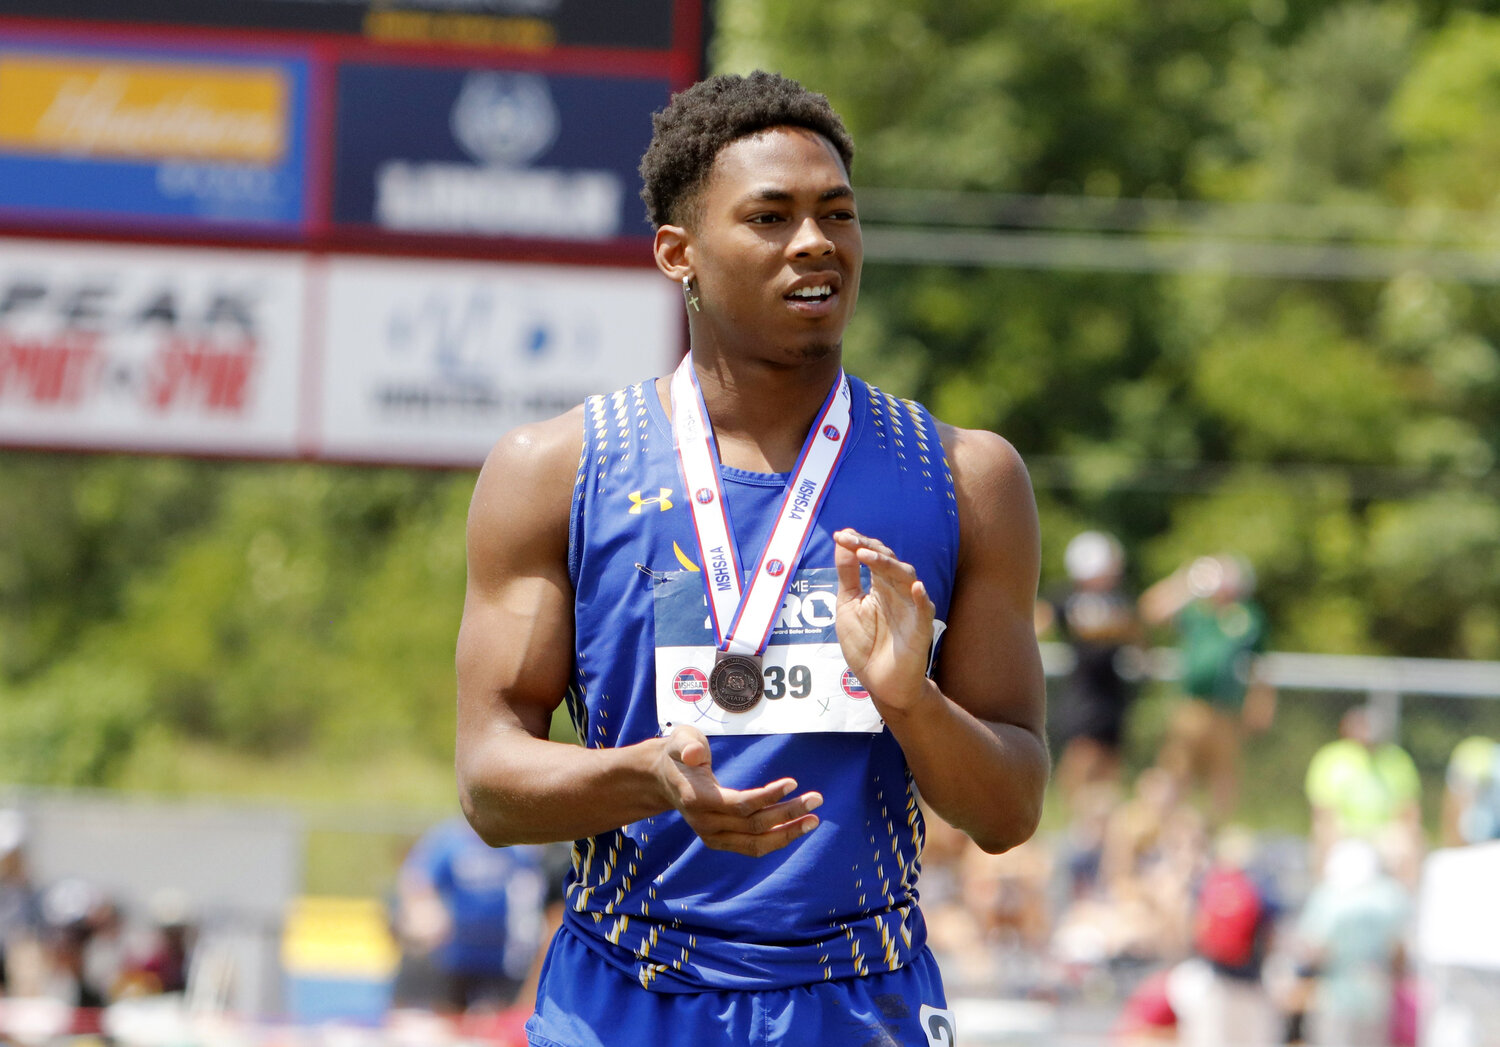 Wright City senior Jeremiah Davis claps while on the podium after receiving his medal for placing third in the 100-meter dash. Davis earned four medals at the state track and field meet last week.